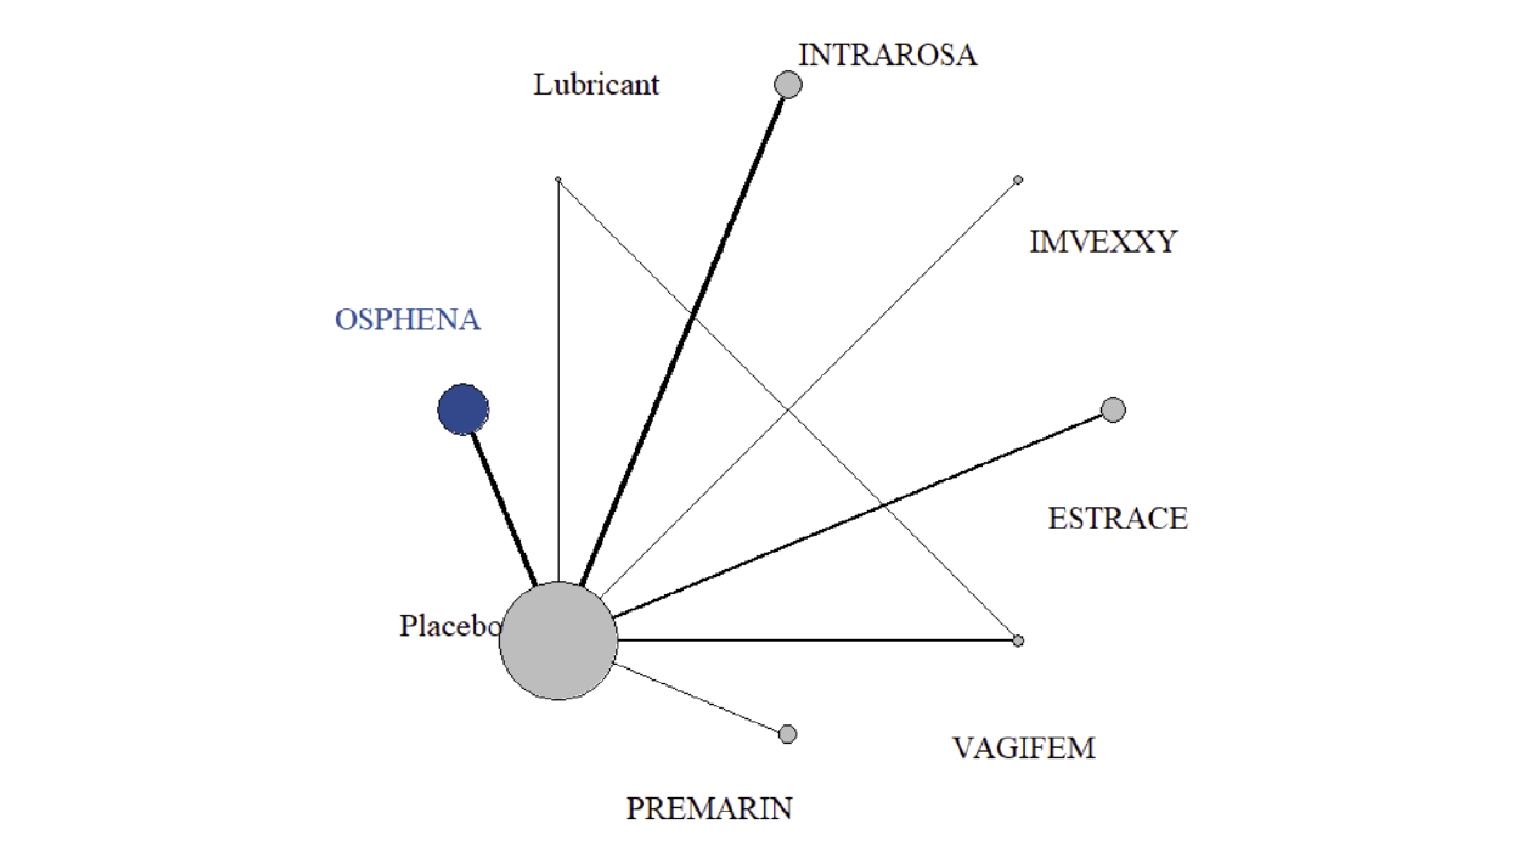 The evidence network for most bothersome symptom score for vaginal dryness and dyspareunia combined at 12 weeks is shown for the sponsor-submitted ITC. In the network, Osphena, lubricant, Intrarosa, Imvexxy, Estrace, Vagifem, and Premarin are connected to each other indirectly through the placebo node. Lubricant and Vagifem are connected directly.